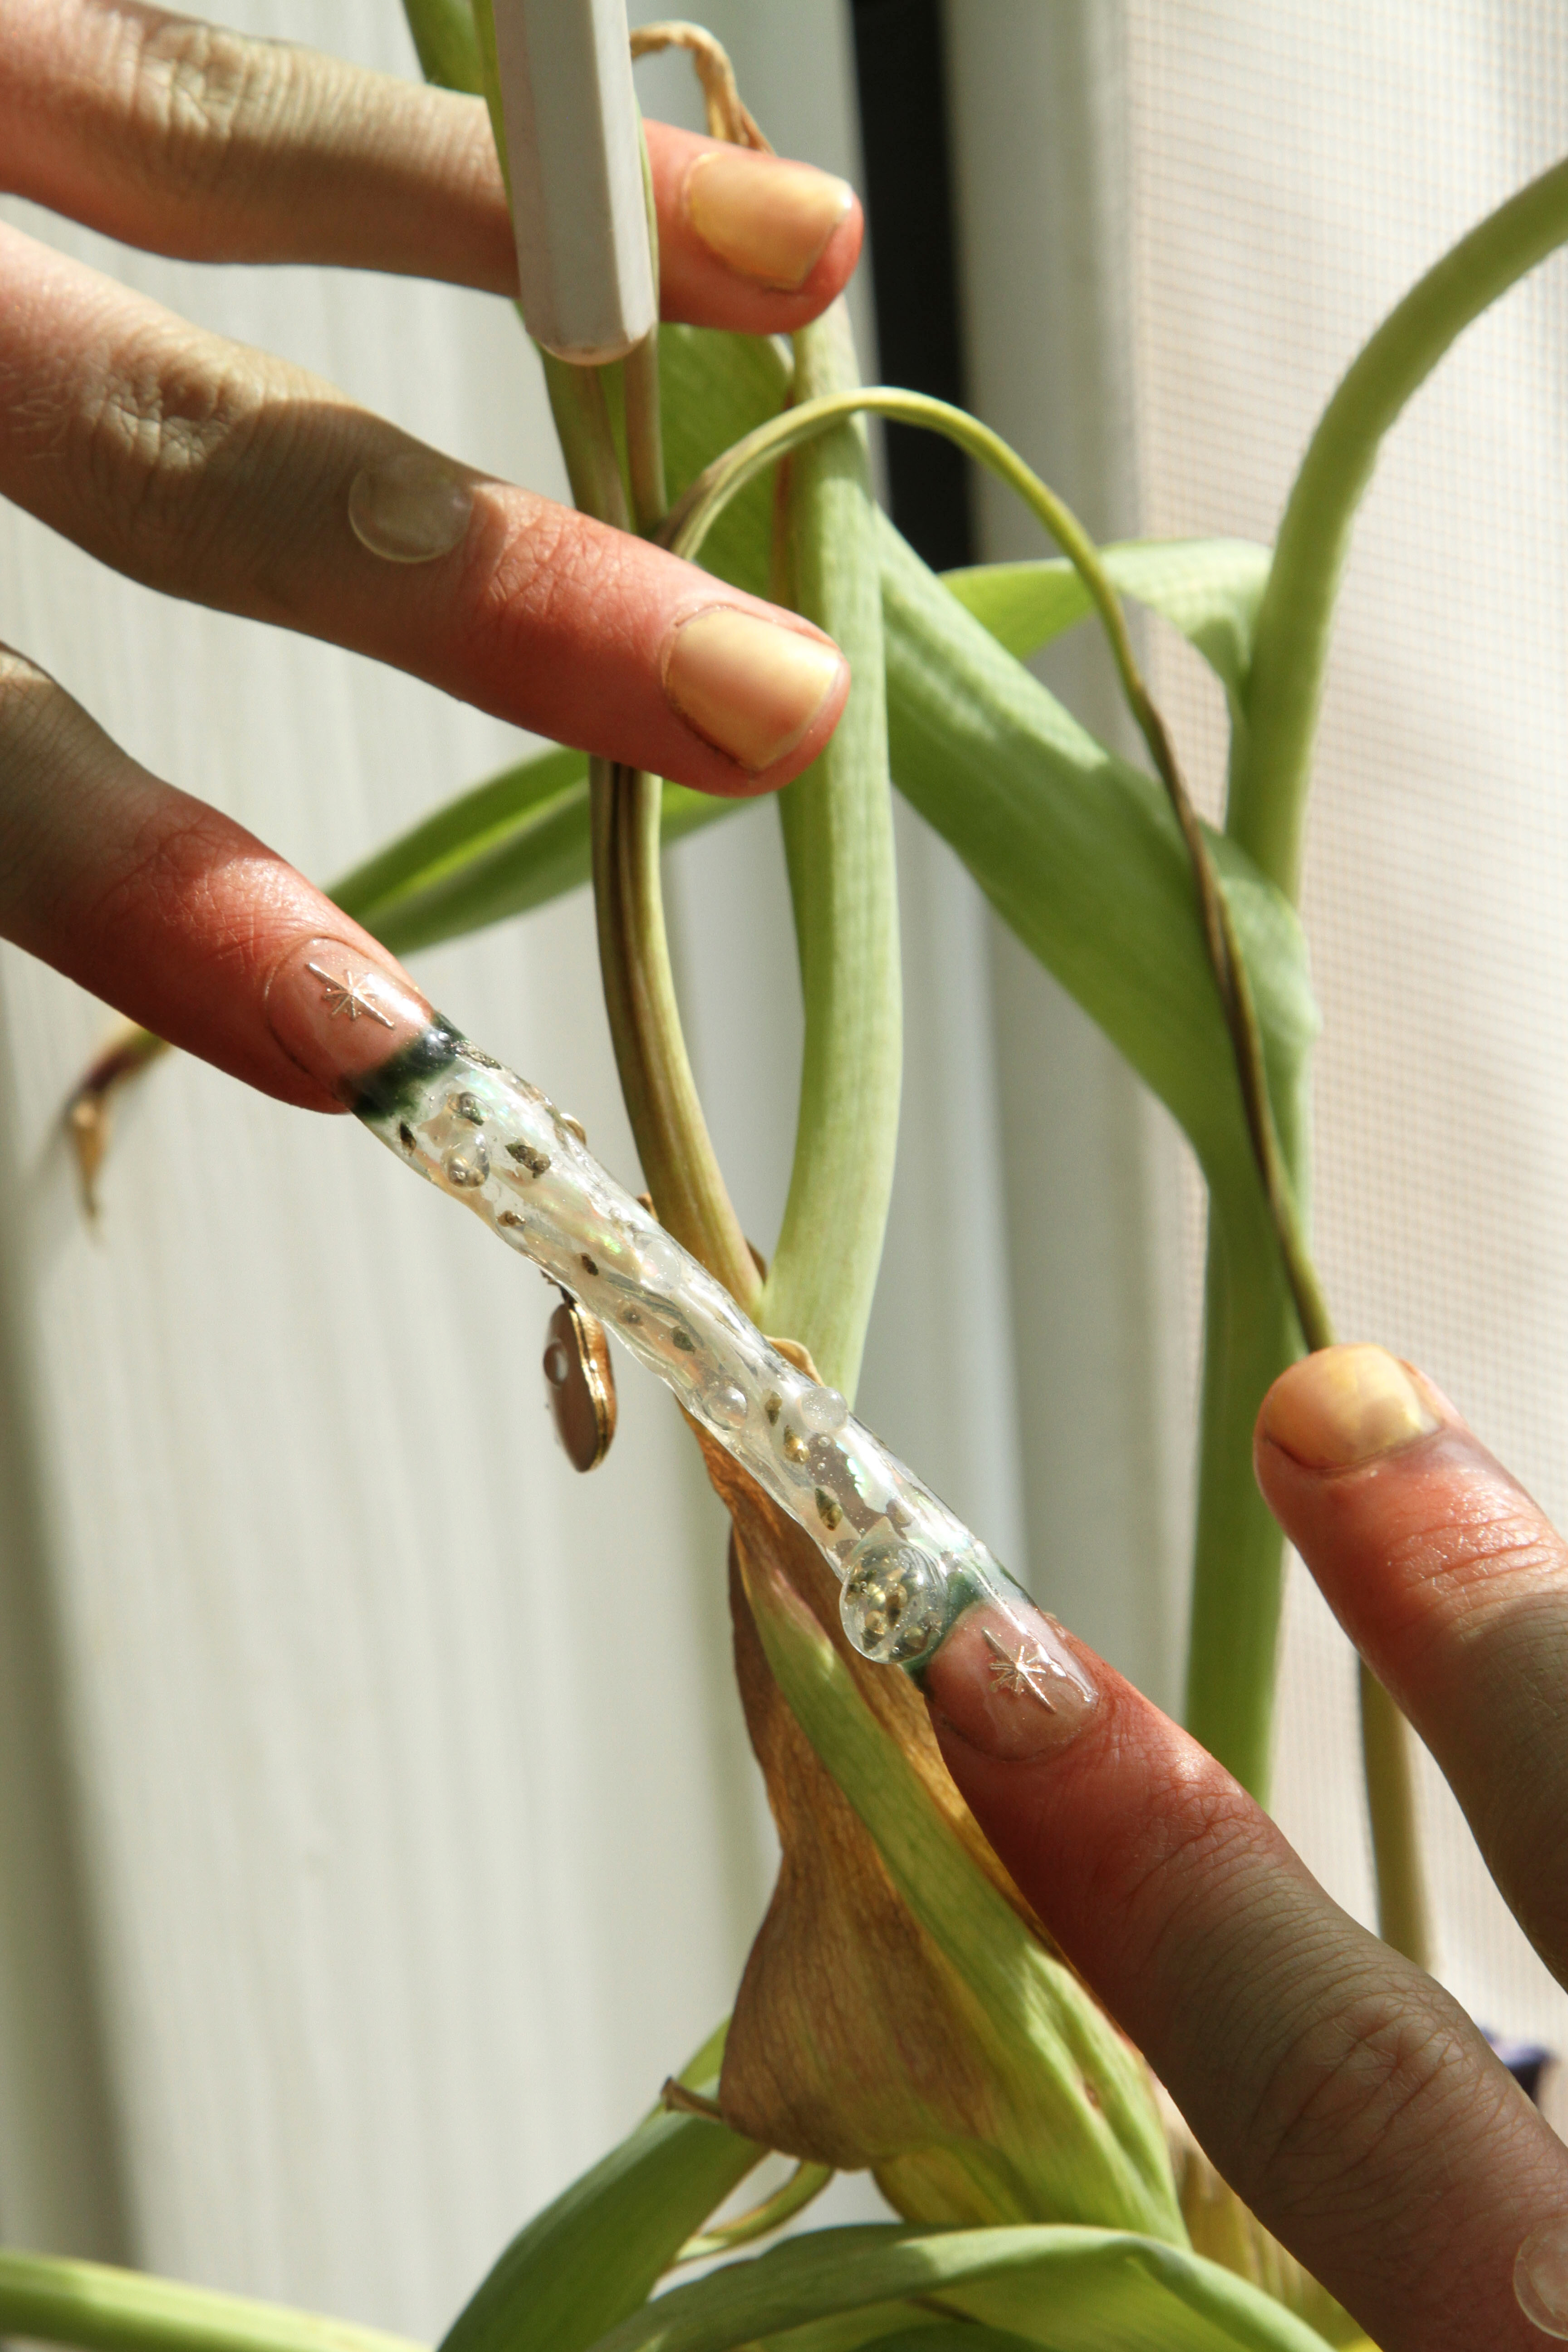 Two pointer fingers connected by a transparent nail sculpture full of tiny snails resting over a green plant stalk